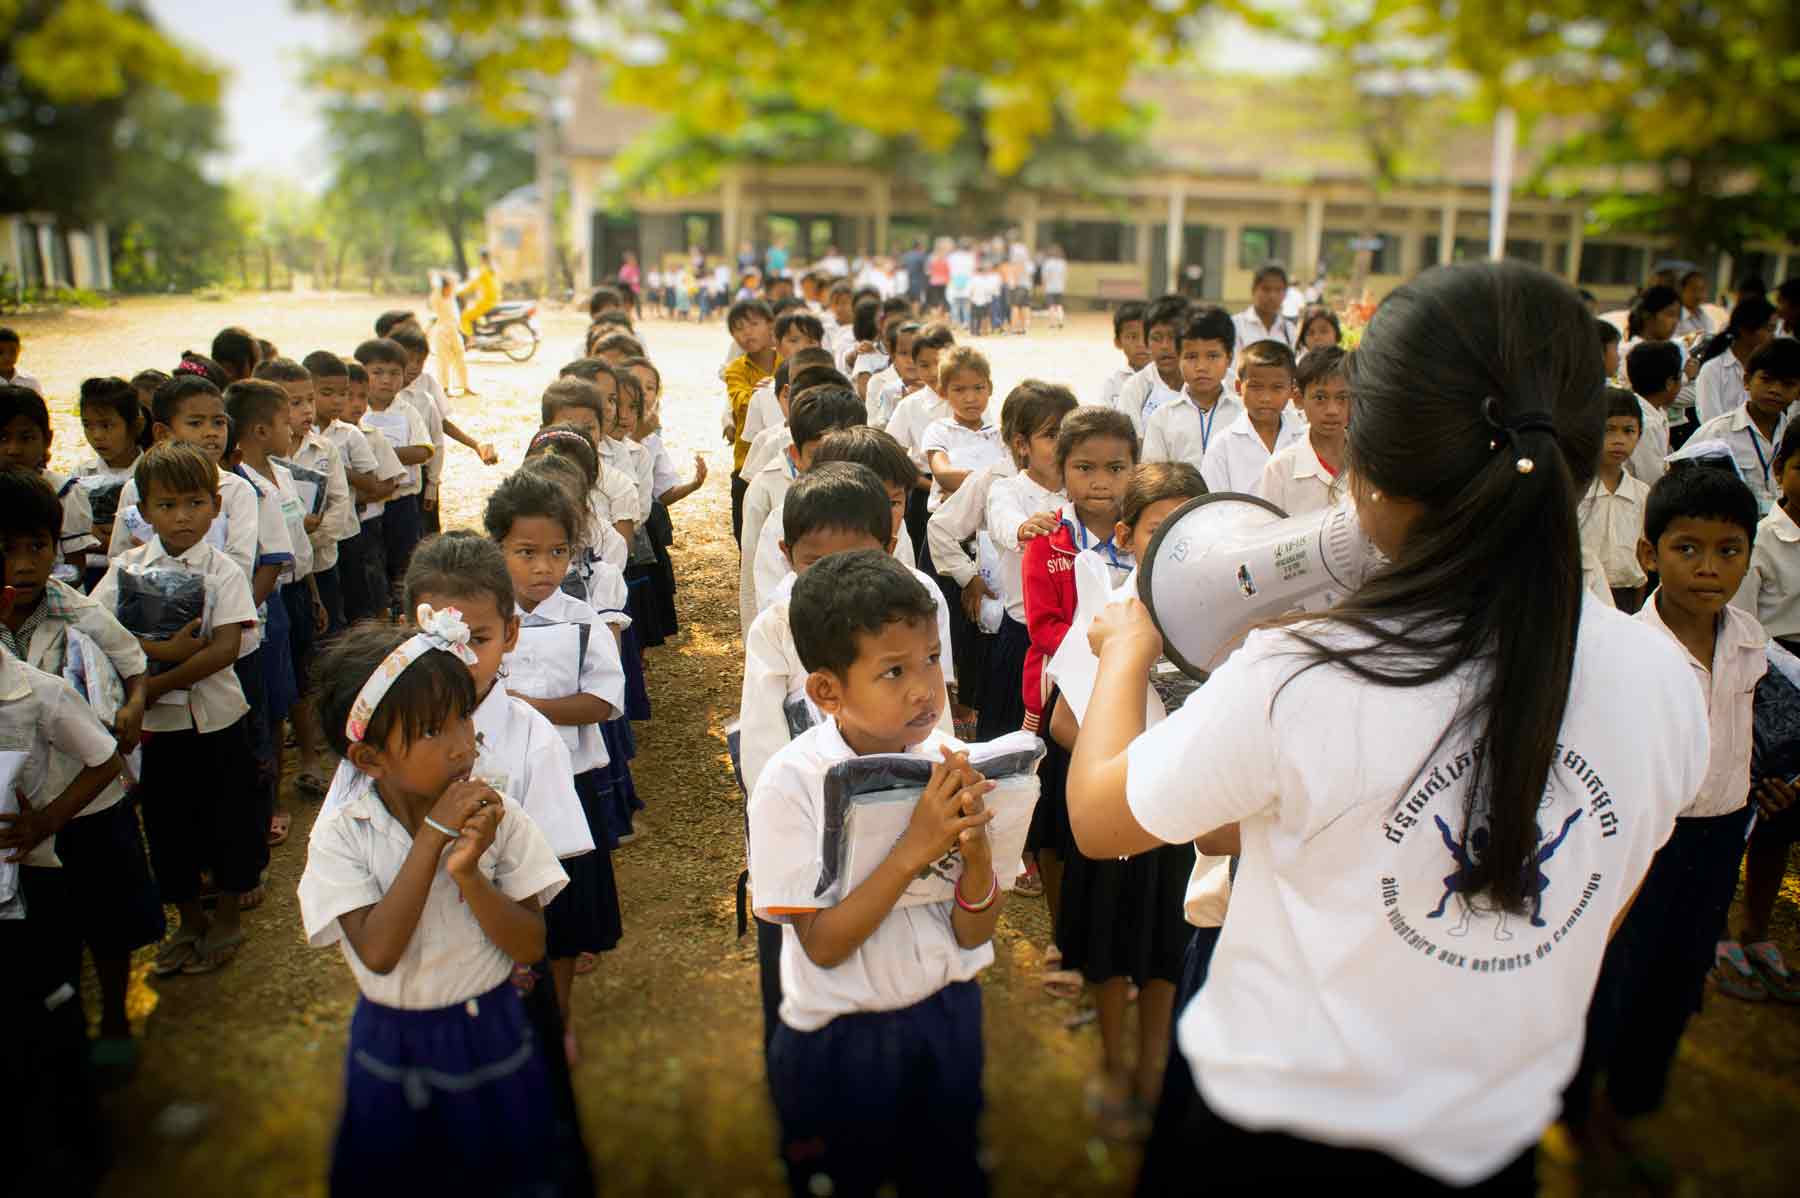 Young volunteer in Cambodia during an education-related humanitarian action with hundreds of children in a public school.